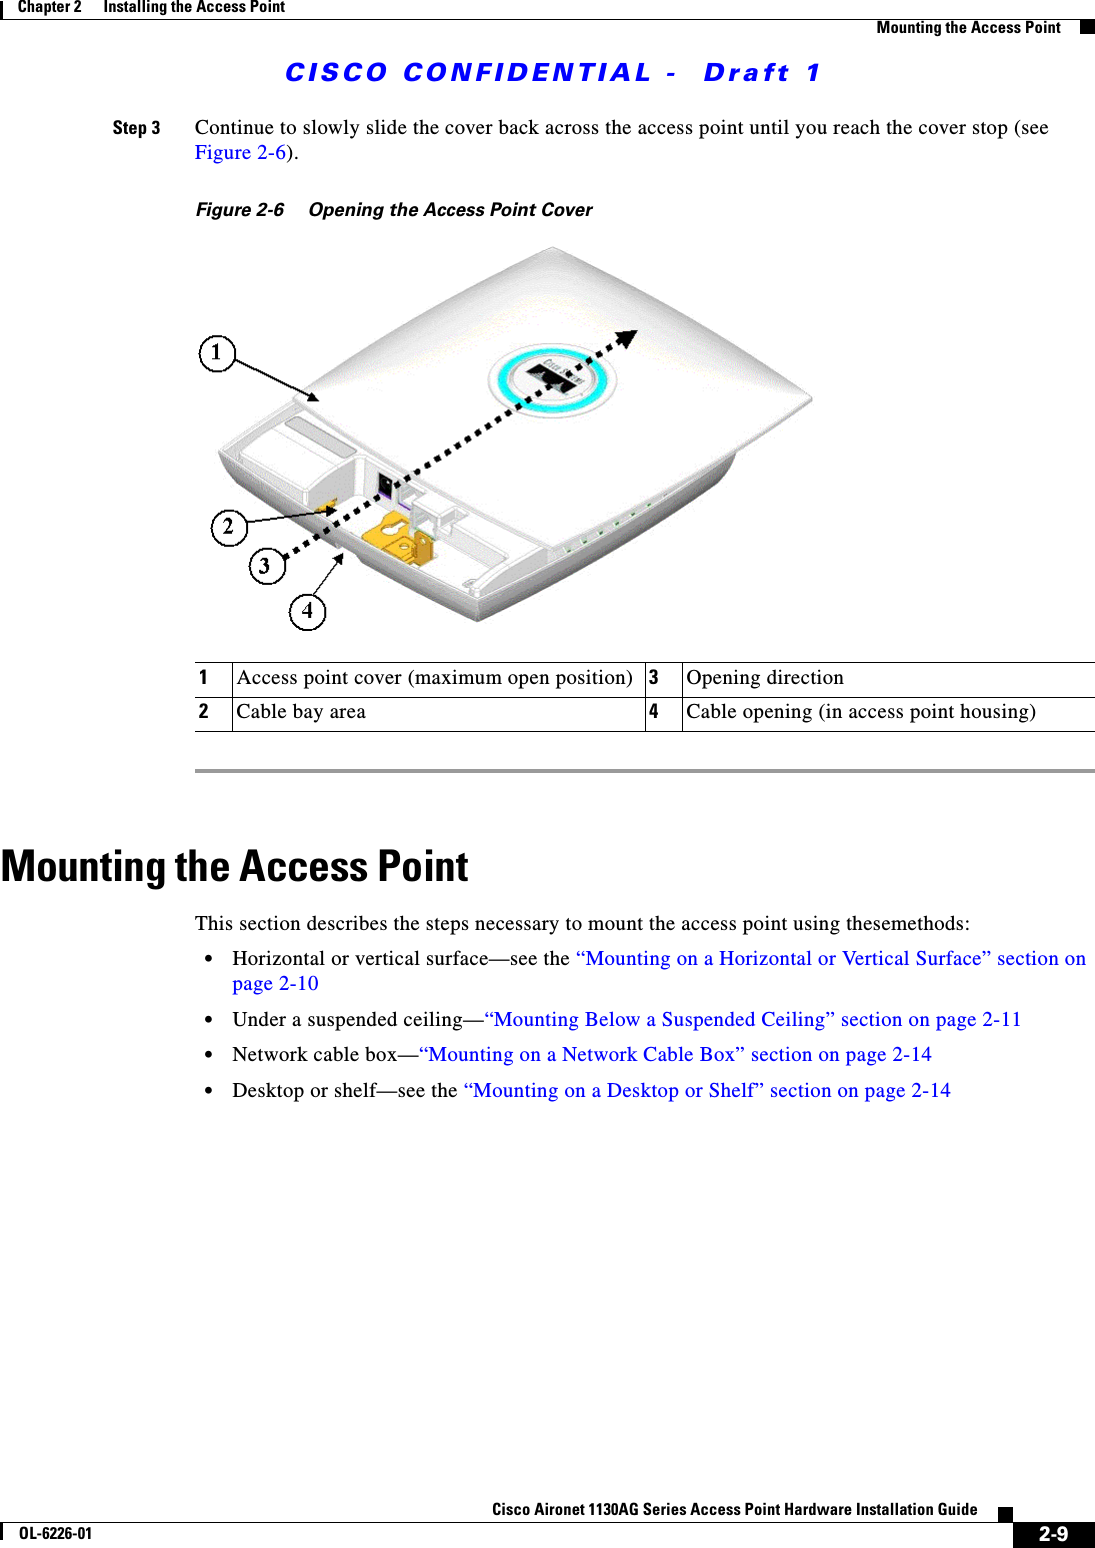  CISCO CONFIDENTIAL -  Draft 12-9Cisco Aironet 1130AG Series Access Point Hardware Installation GuideOL-6226-01Chapter 2      Installing the Access PointMounting the Access PointStep 3 Continue to slowly slide the cover back across the access point until you reach the cover stop (see Figure 2-6).Figure 2-6 Opening the Access Point Cover Mounting the Access PointThis section describes the steps necessary to mount the access point using thesemethods:•Horizontal or vertical surface—see the “Mounting on a Horizontal or Vertical Surface” section on page 2-10•Under a suspended ceiling—“Mounting Below a Suspended Ceiling” section on page 2-11•Network cable box—“Mounting on a Network Cable Box” section on page 2-14•Desktop or shelf—see the “Mounting on a Desktop or Shelf” section on page 2-141Access point cover (maximum open position) 3Opening direction2Cable bay area 4Cable opening (in access point housing)